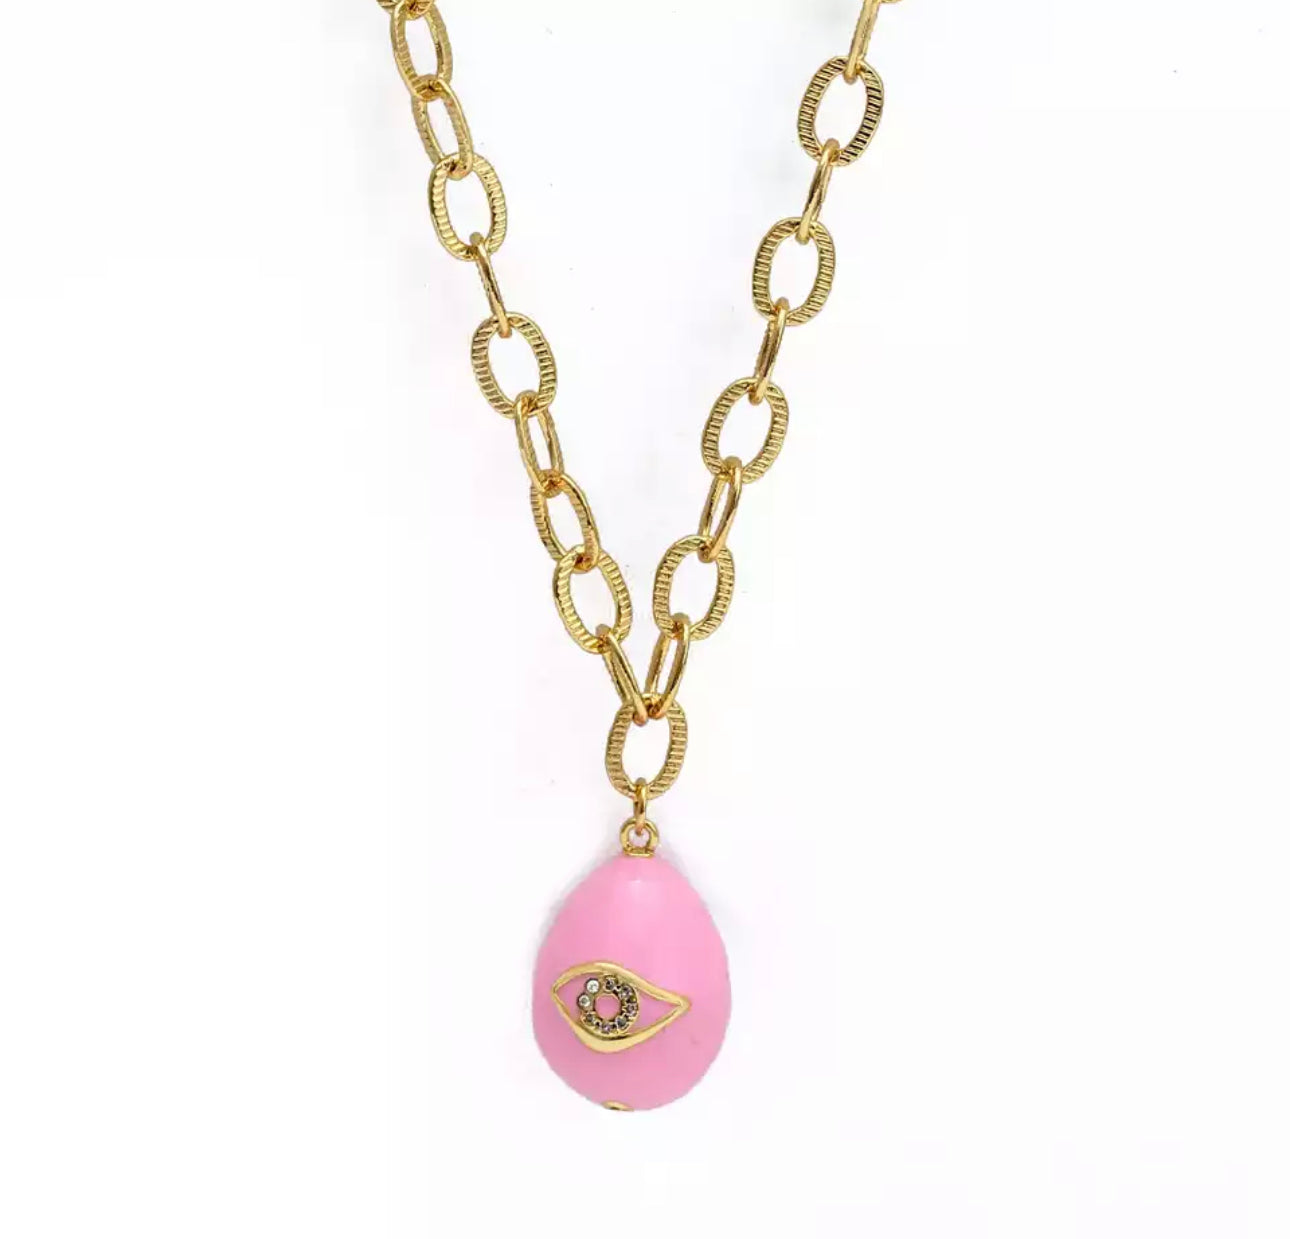 chain link with pink evil eye pendant